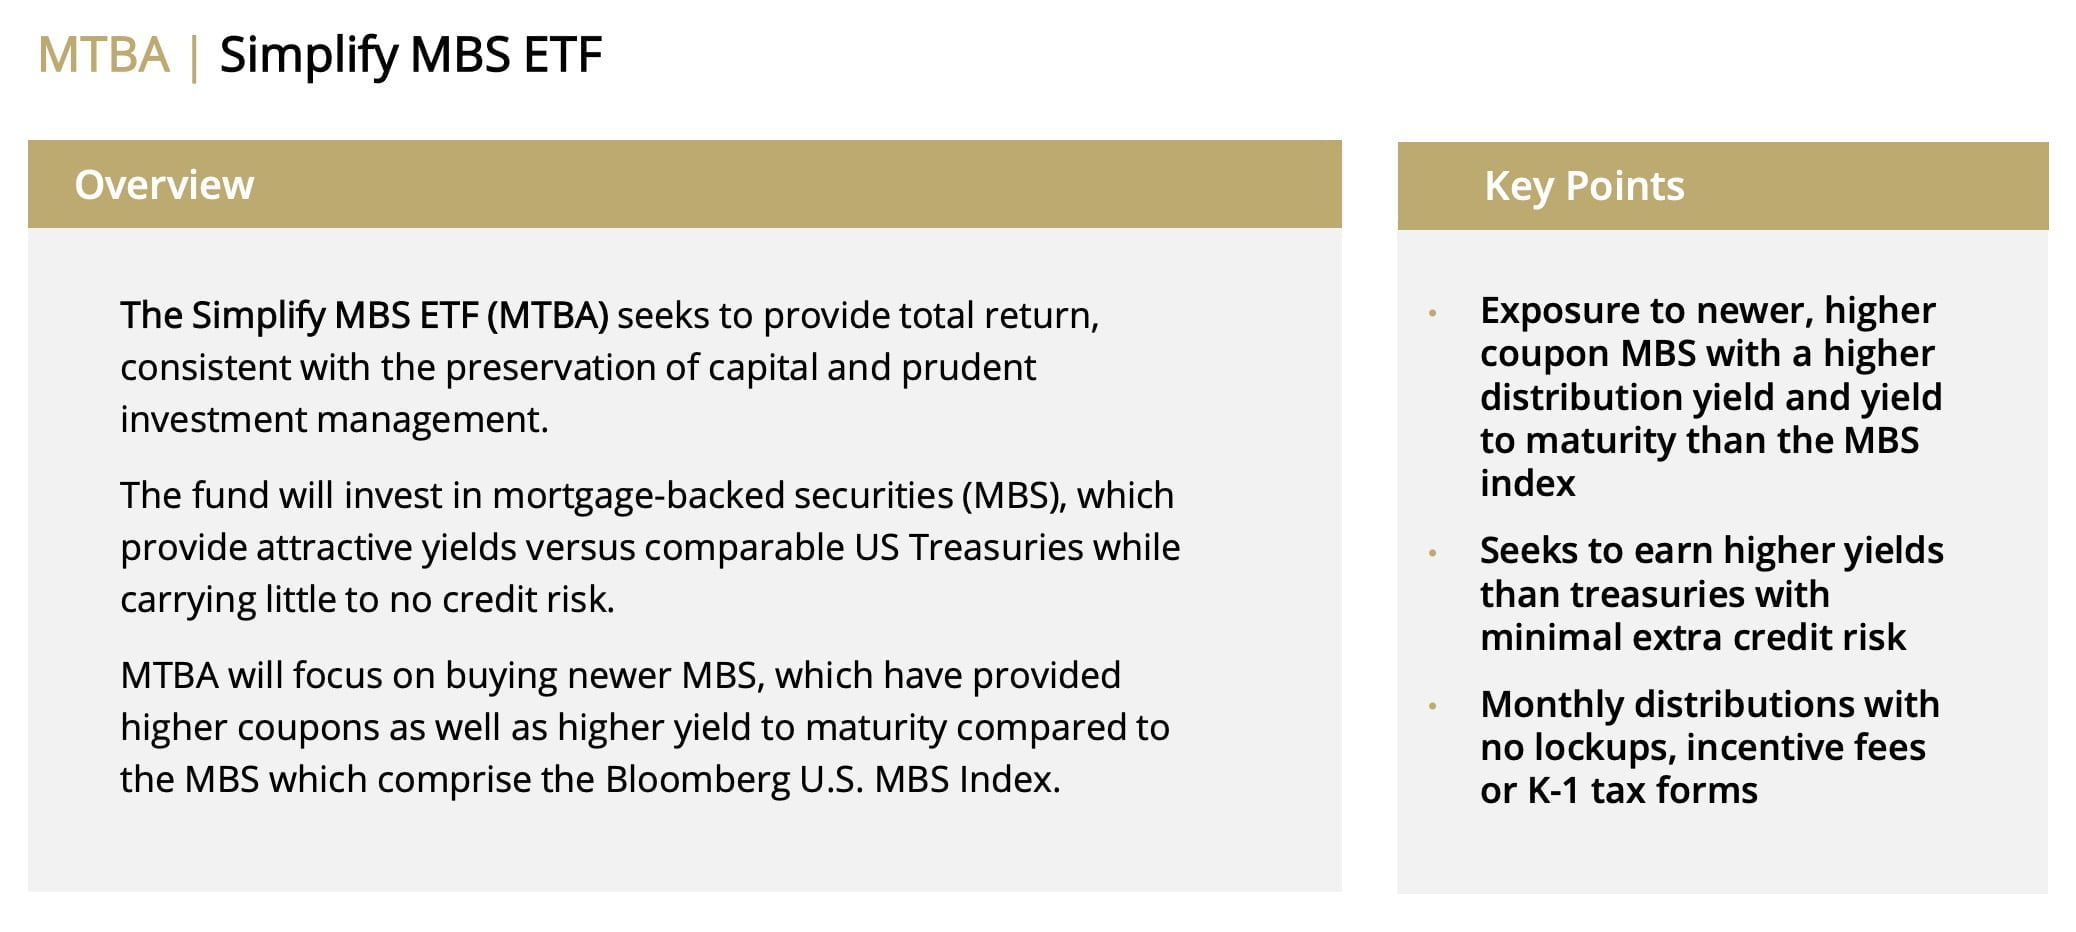 MTBA Simplify MBS ETF overview and key points 